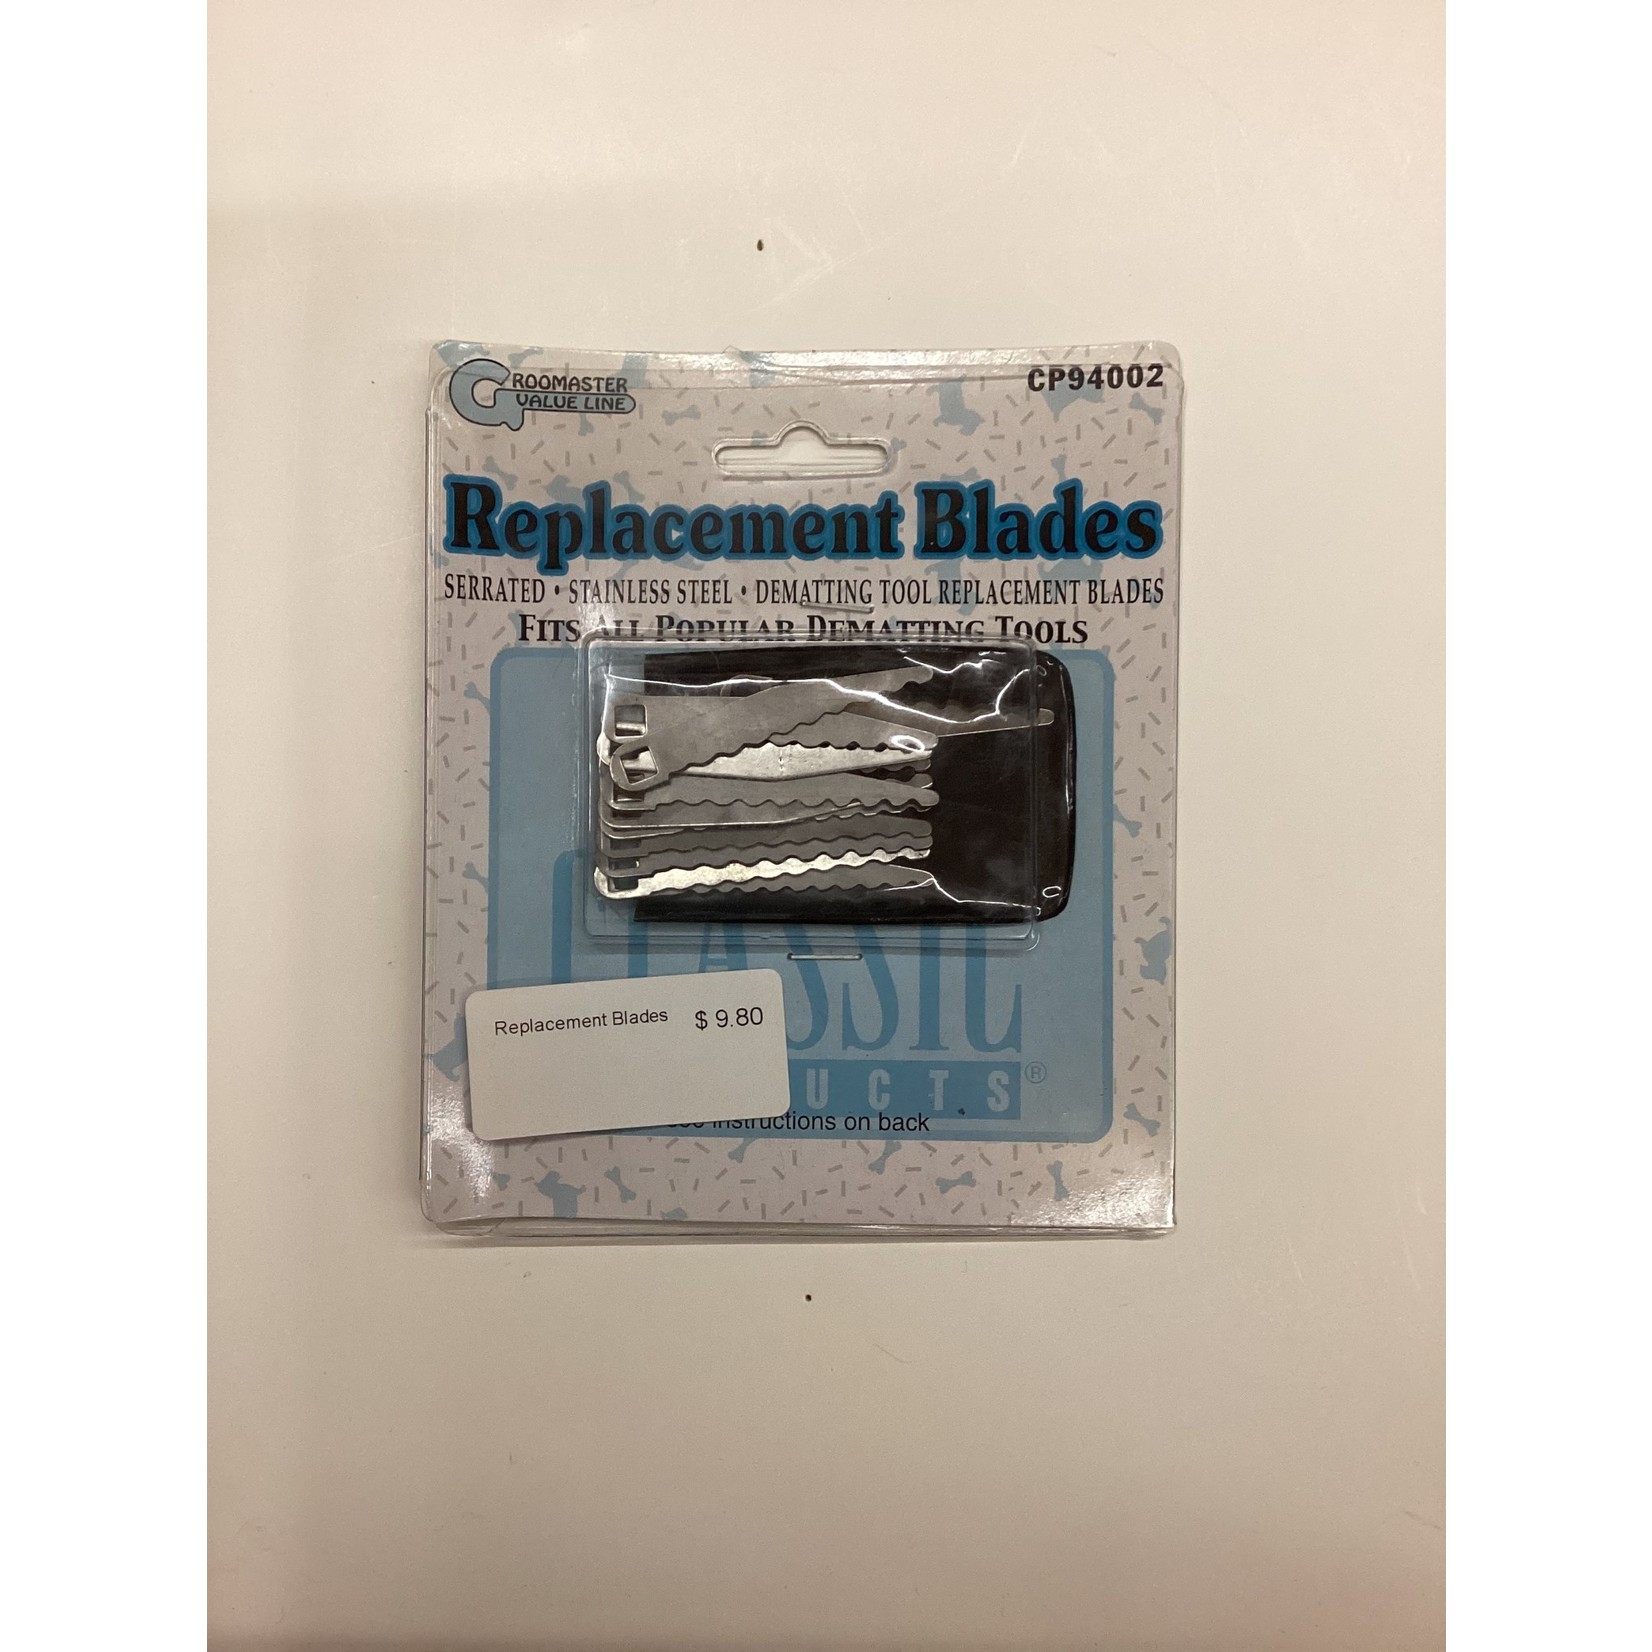 Groom Master Value Line Replacement Blades